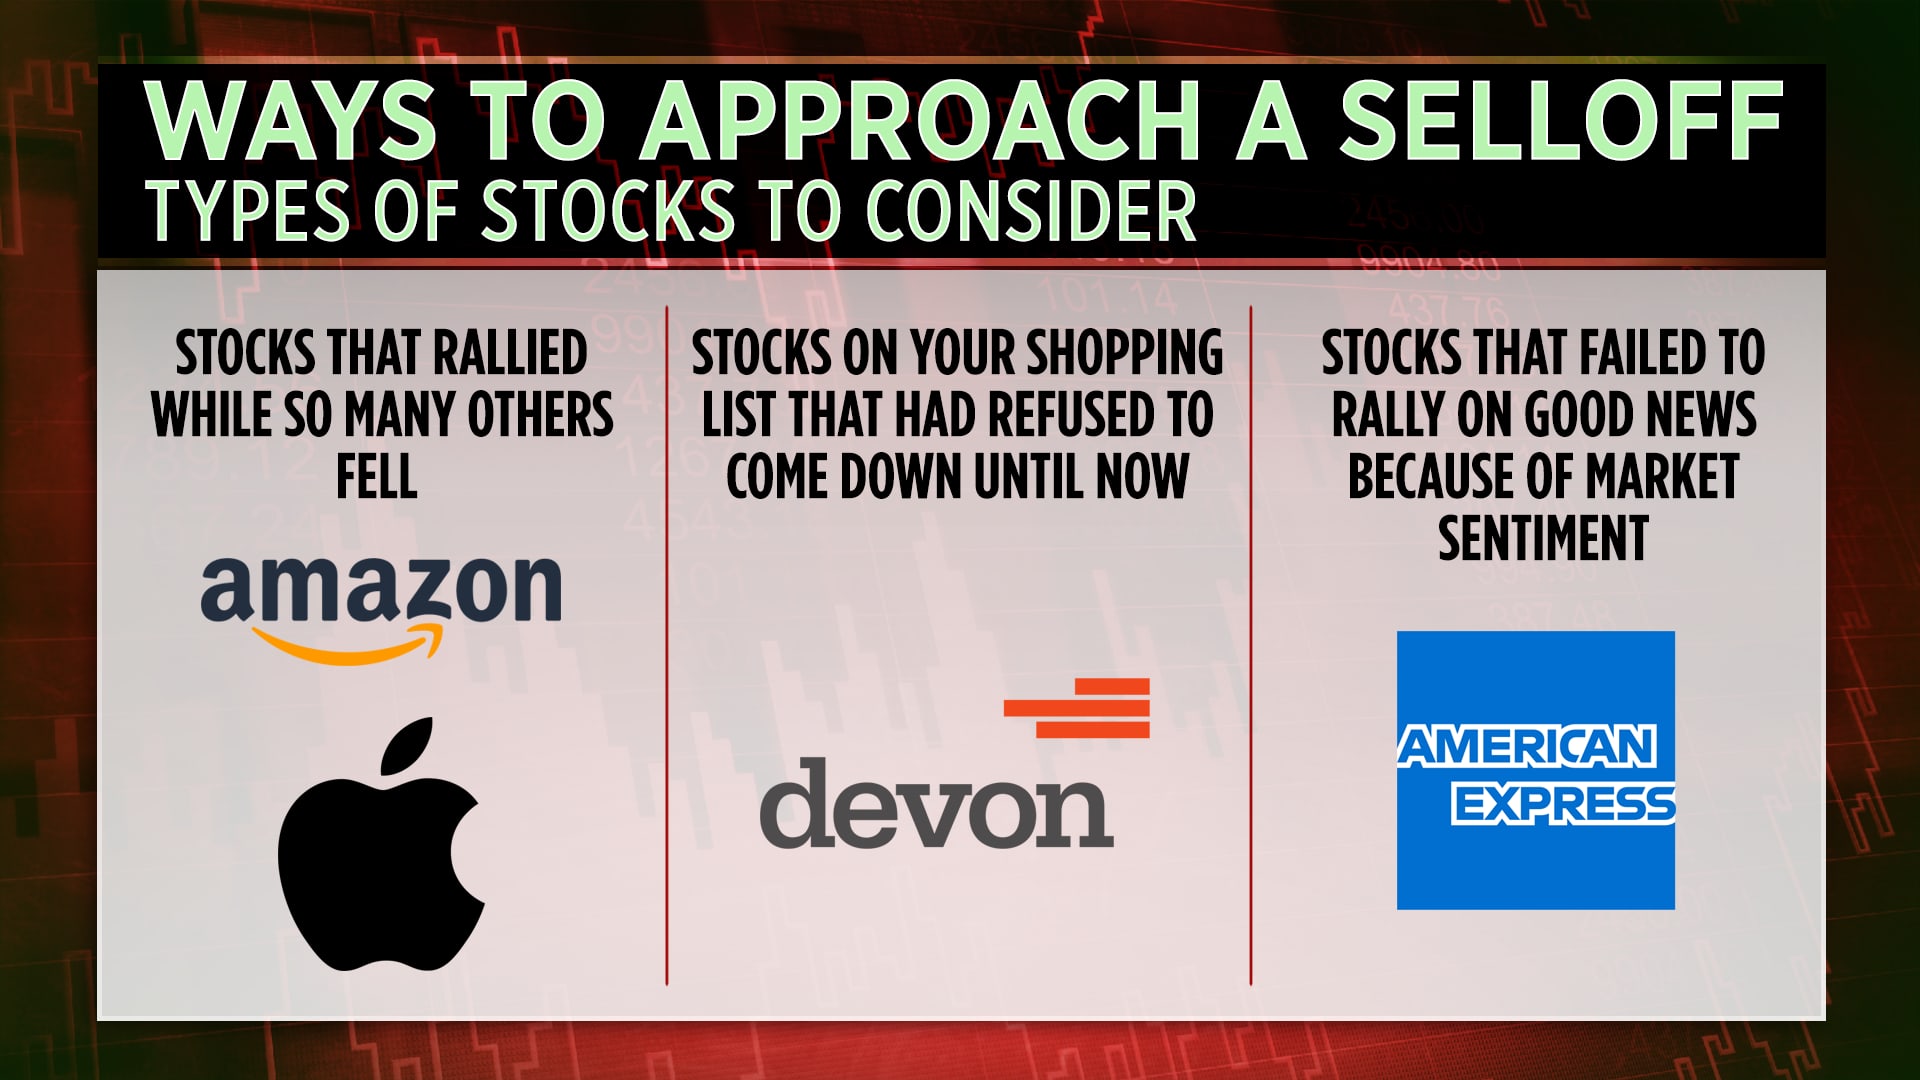 Jim Cramer’s Three Types Of Stocks To Buy If The Market Sells Off